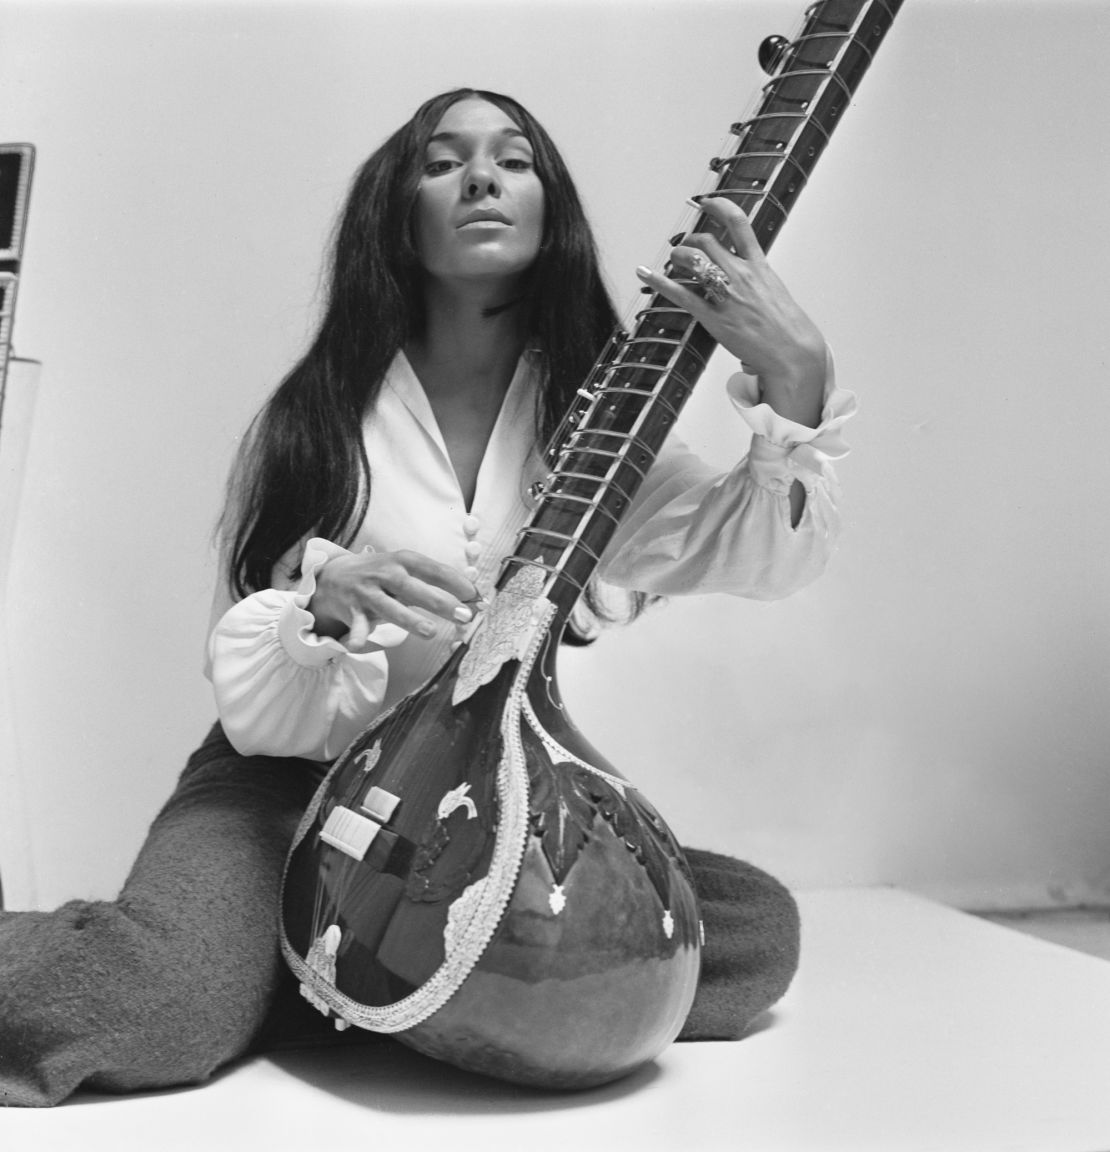 Canadian-American folk singer Buffy Sainte-Marie with a sitar, 27th May 1966. (Photo by Reg Burkett/Express/Hulton Archive/Getty Images)